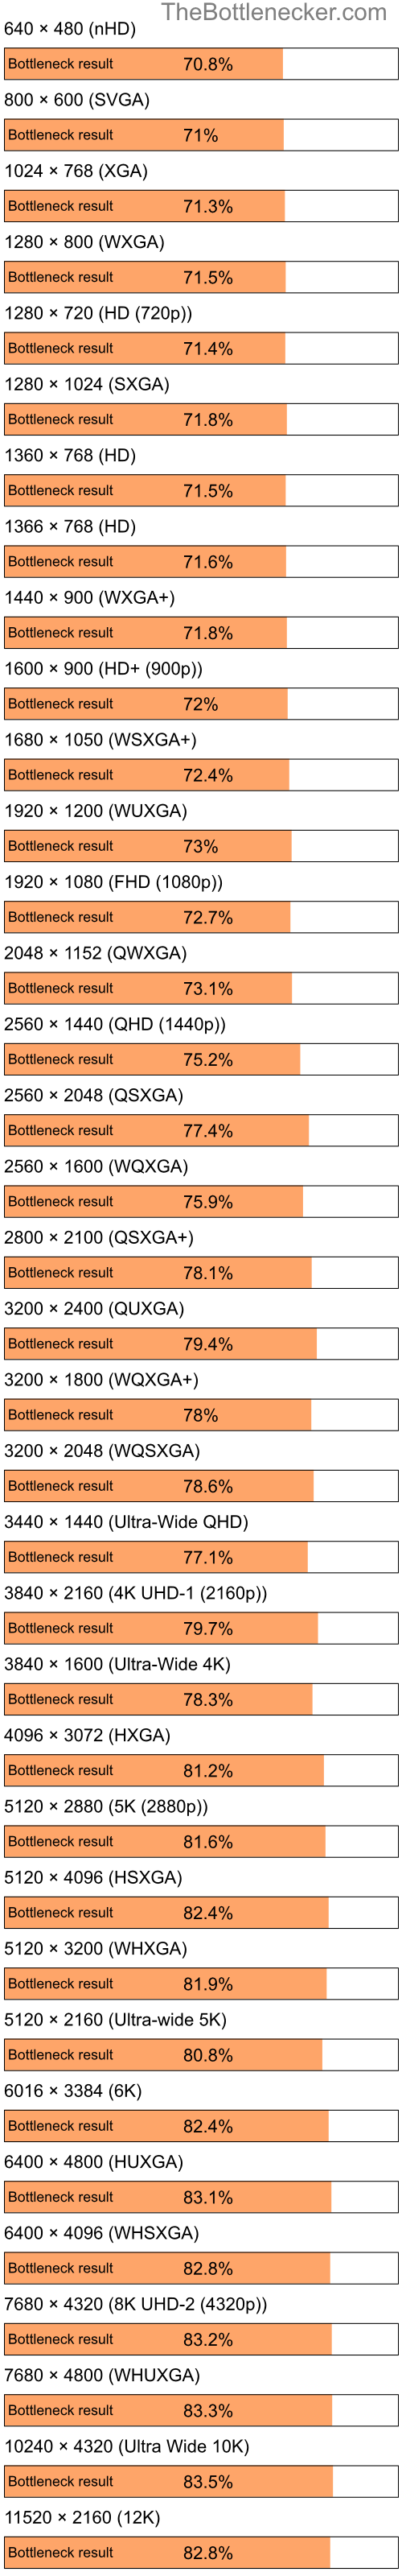 Bottleneck results by resolution for Intel Atom Z520 and AMD Mobility Radeon HD 2400 in Graphic Card Intense Tasks